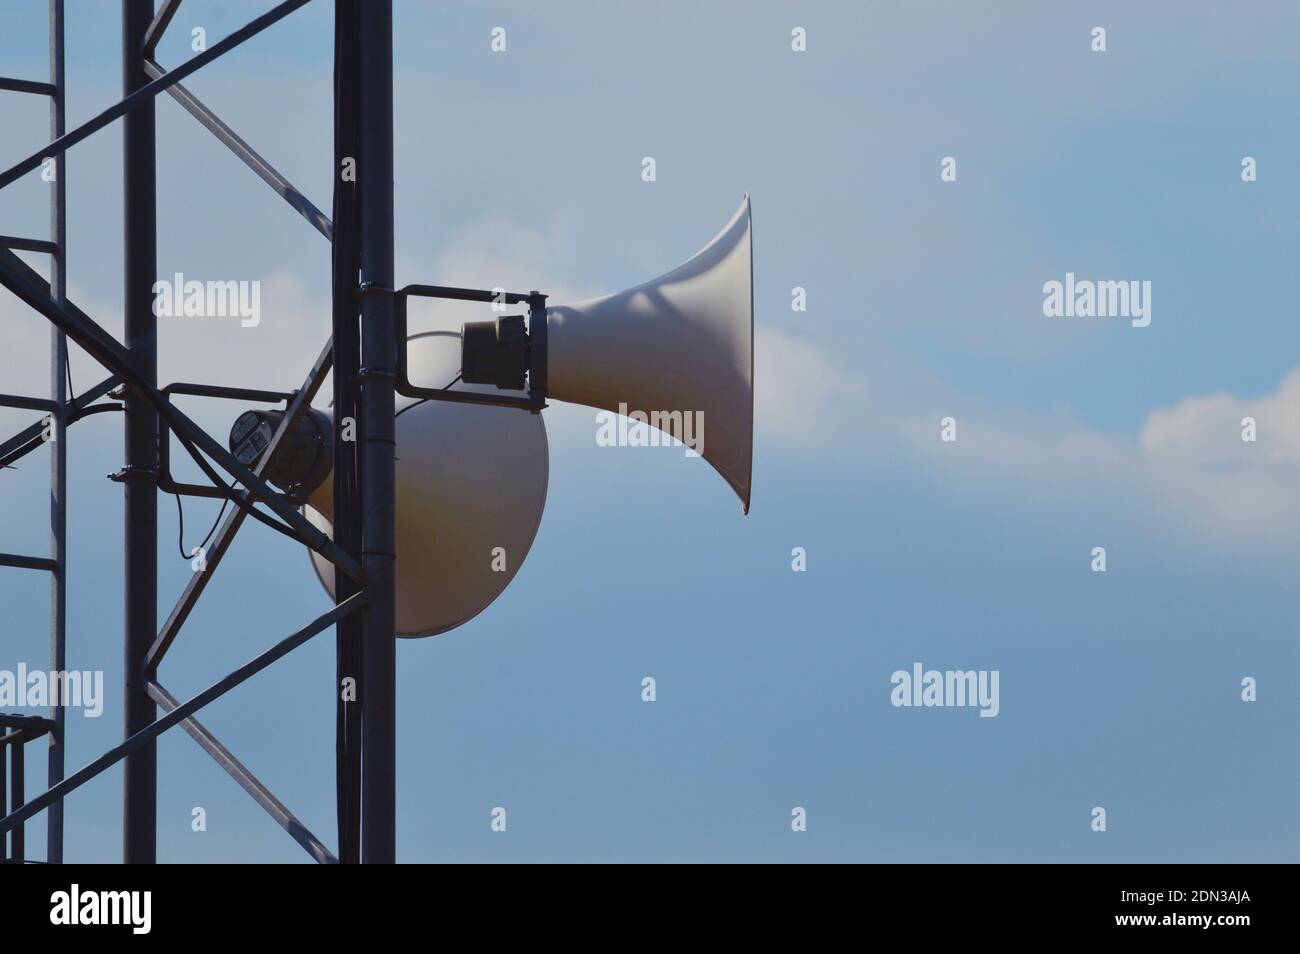 Low Angle View Of Speakers On Pole Against Sky Stock Photo